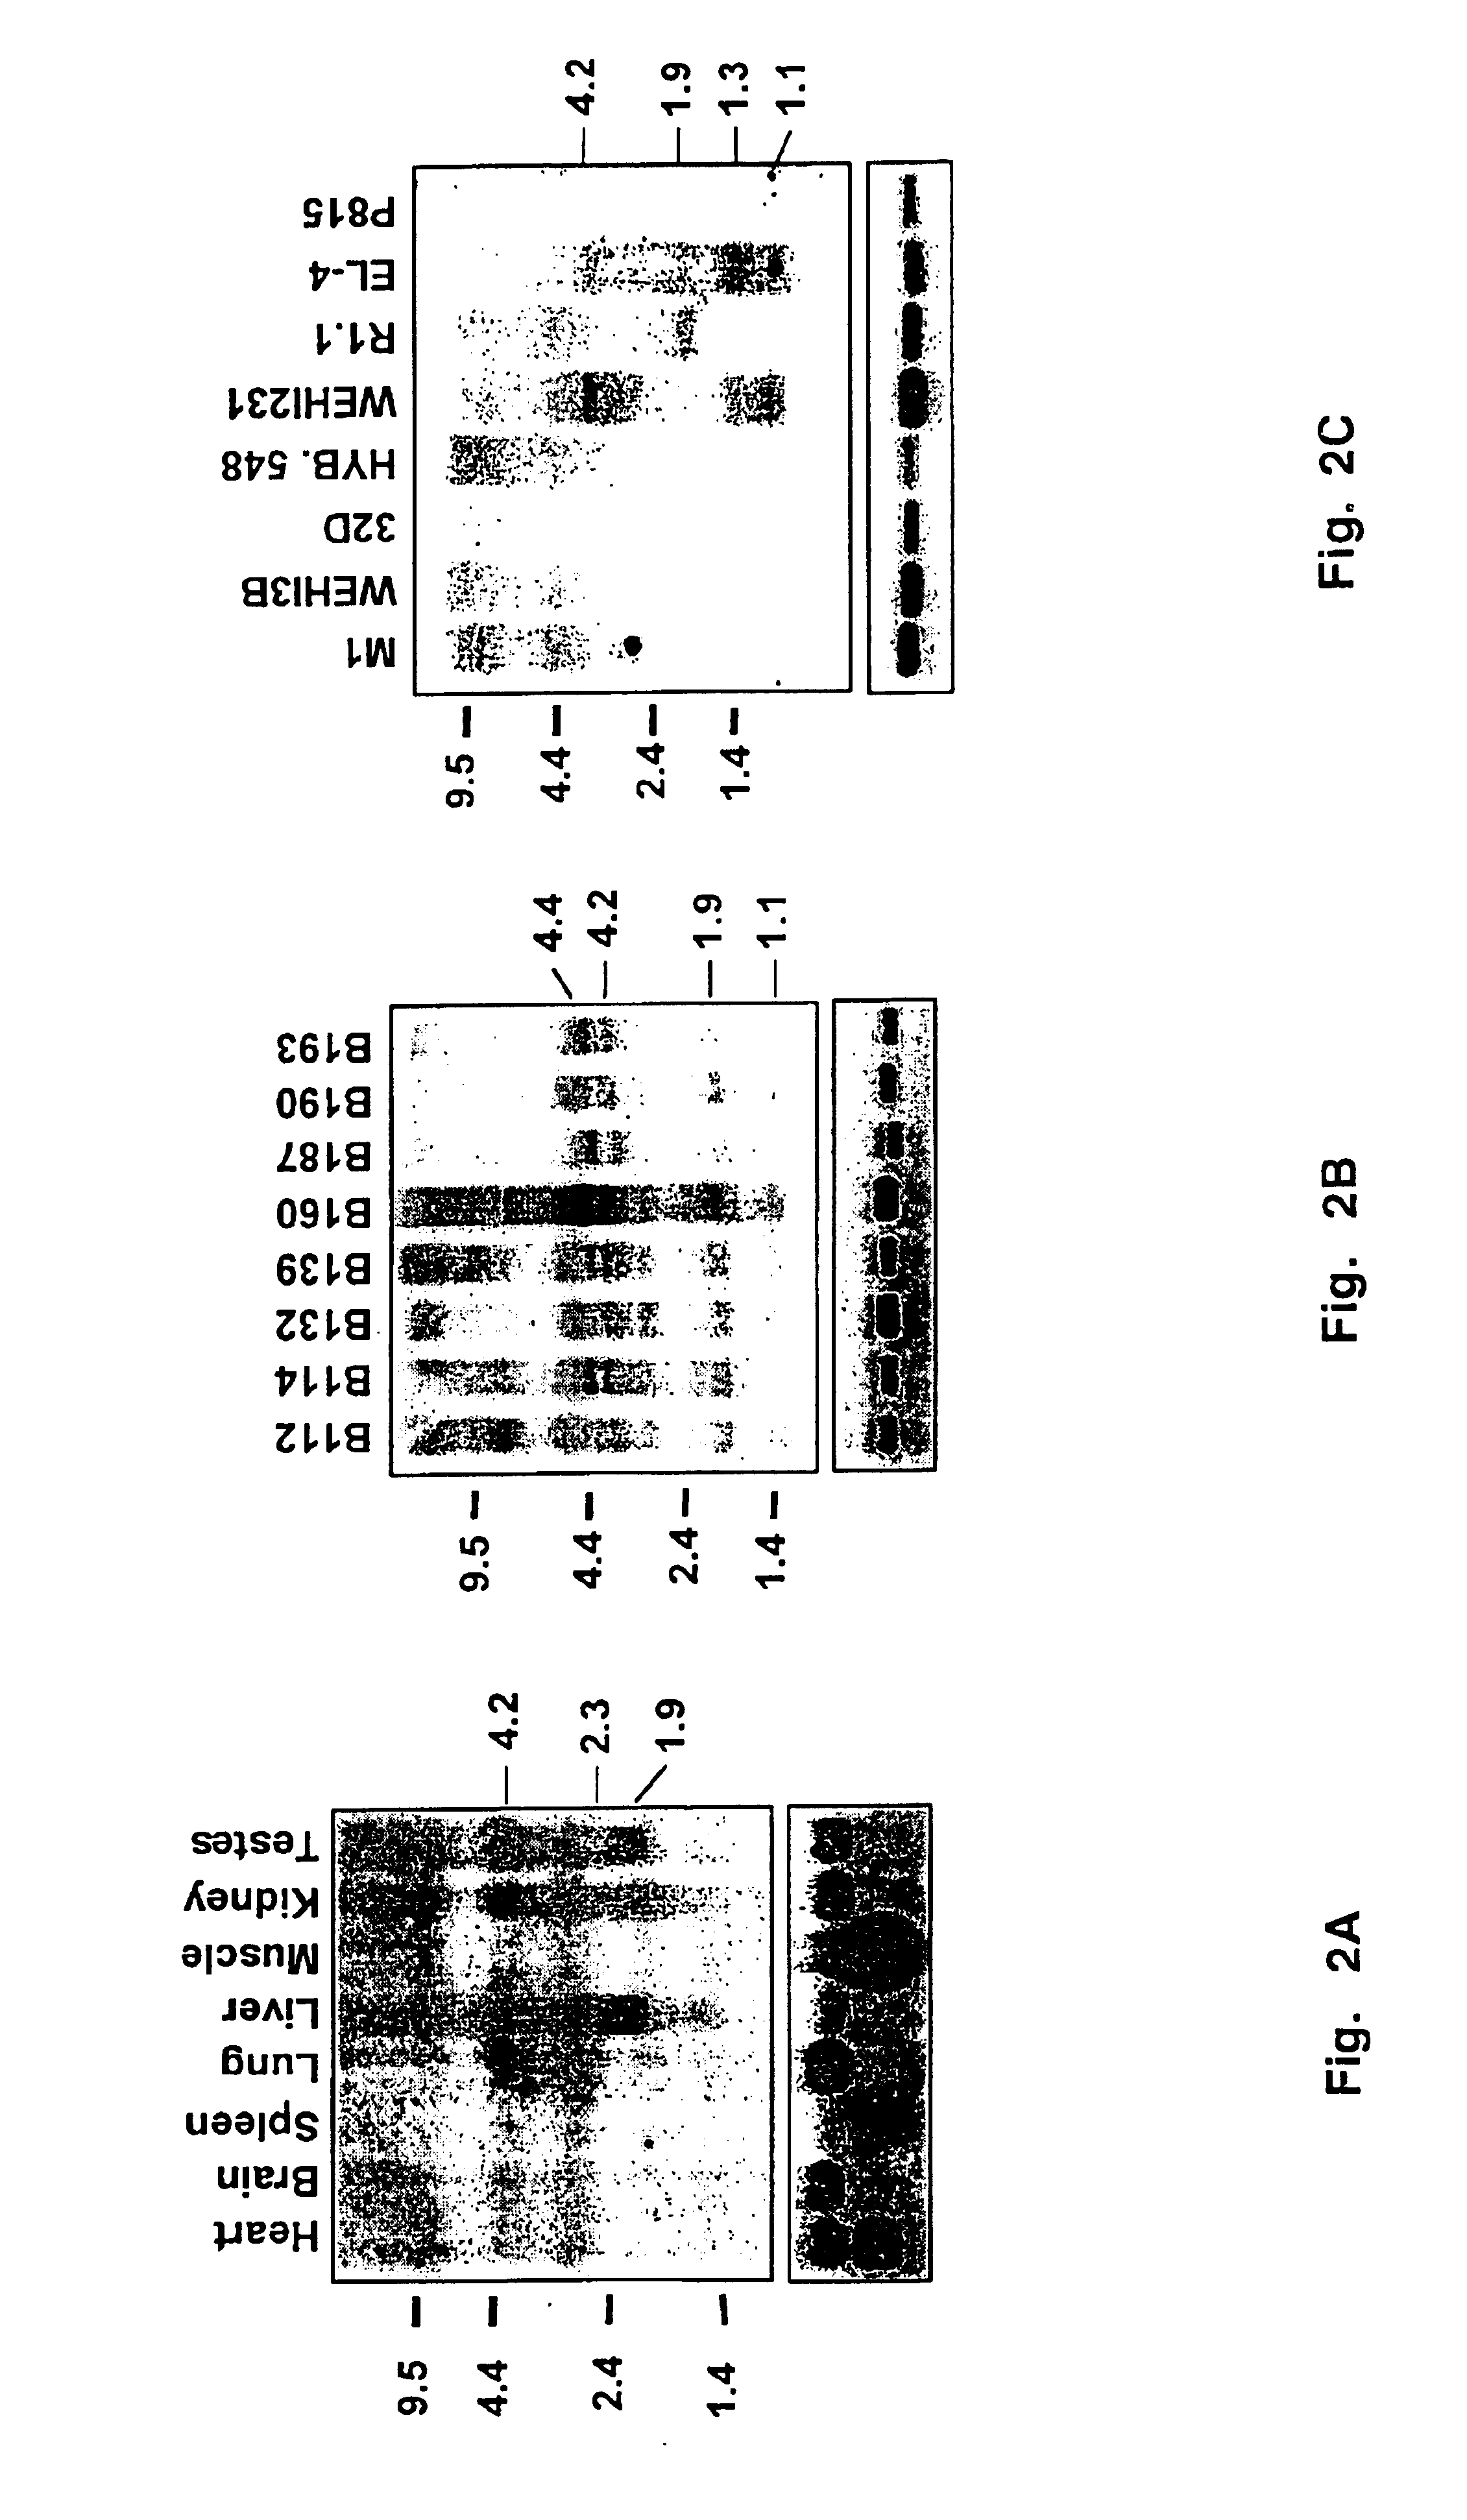 Evi27 gene sequences and protein encoded thereby